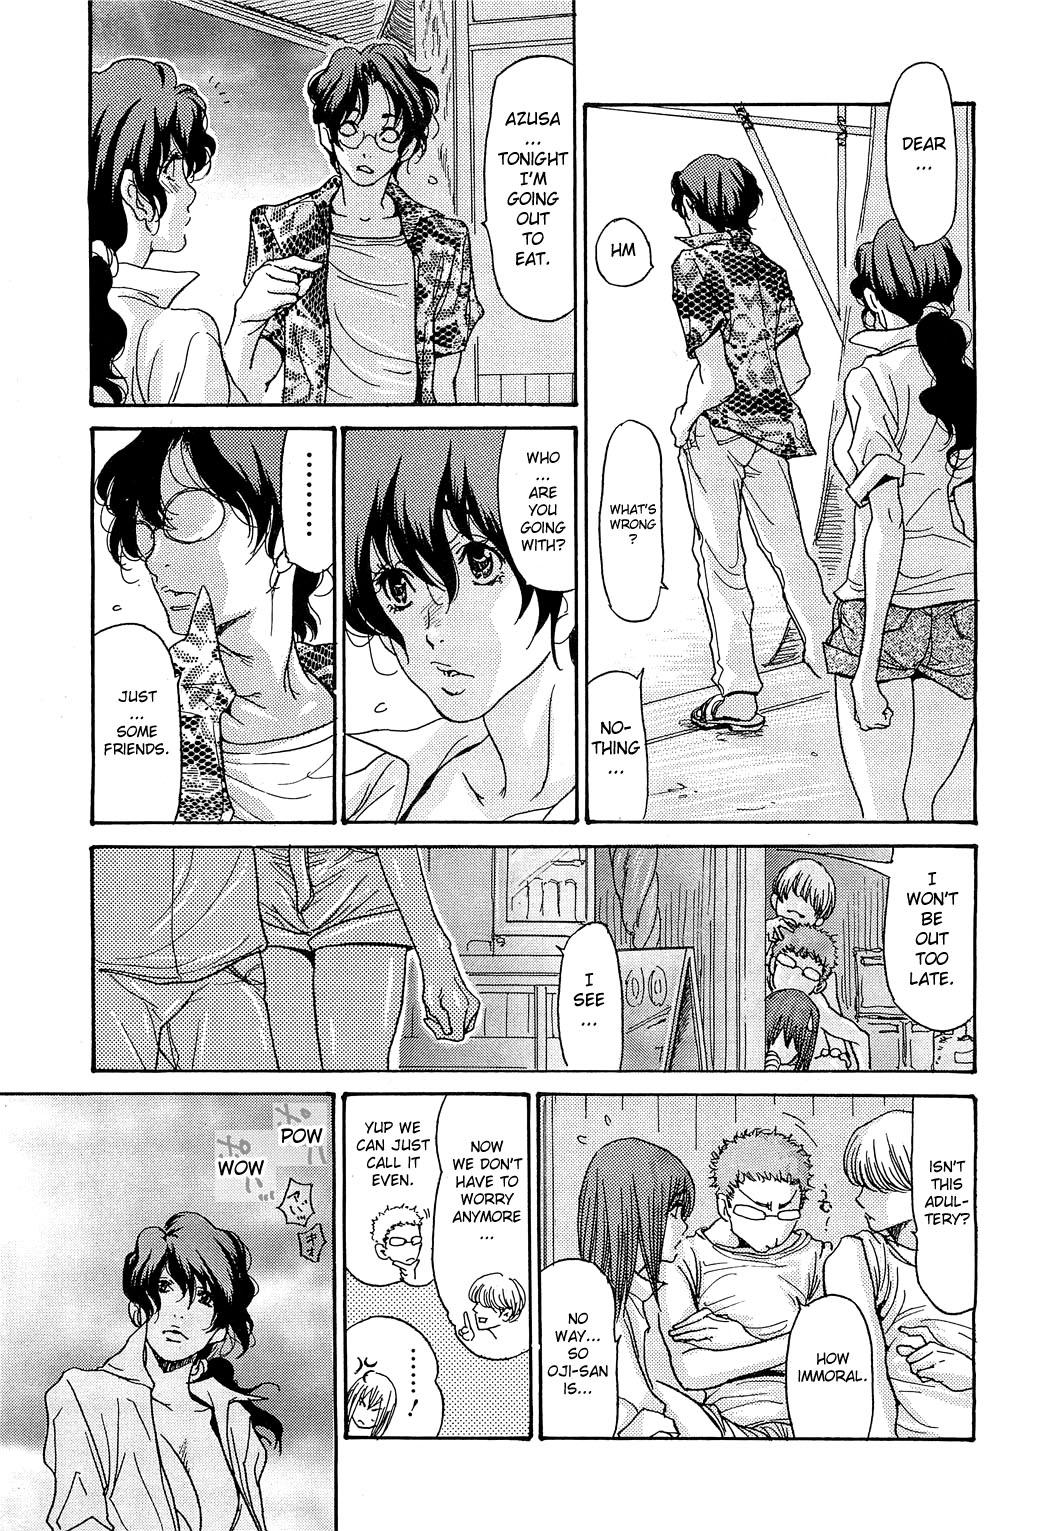 [Aoi Hitori] Umi no Yeah!! 2013 ~The Peaceful Married Couple's Hair Trigger Crisis~ Ch.1 [English][aceonetwo] 6